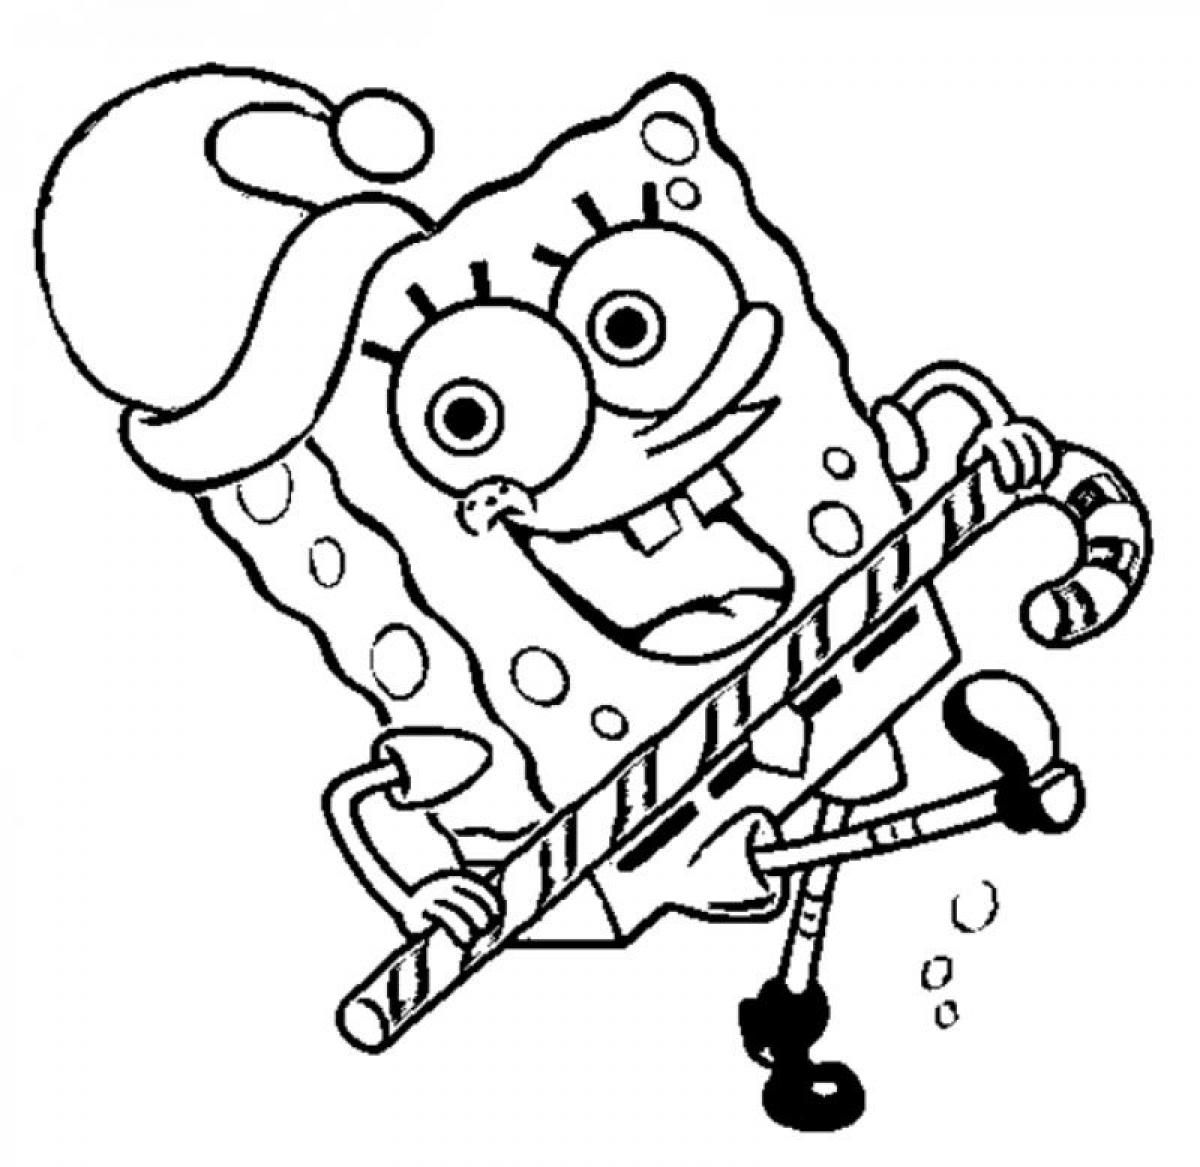 Spongebob Christmas Coloring Pages Free Printable - Coloring Home